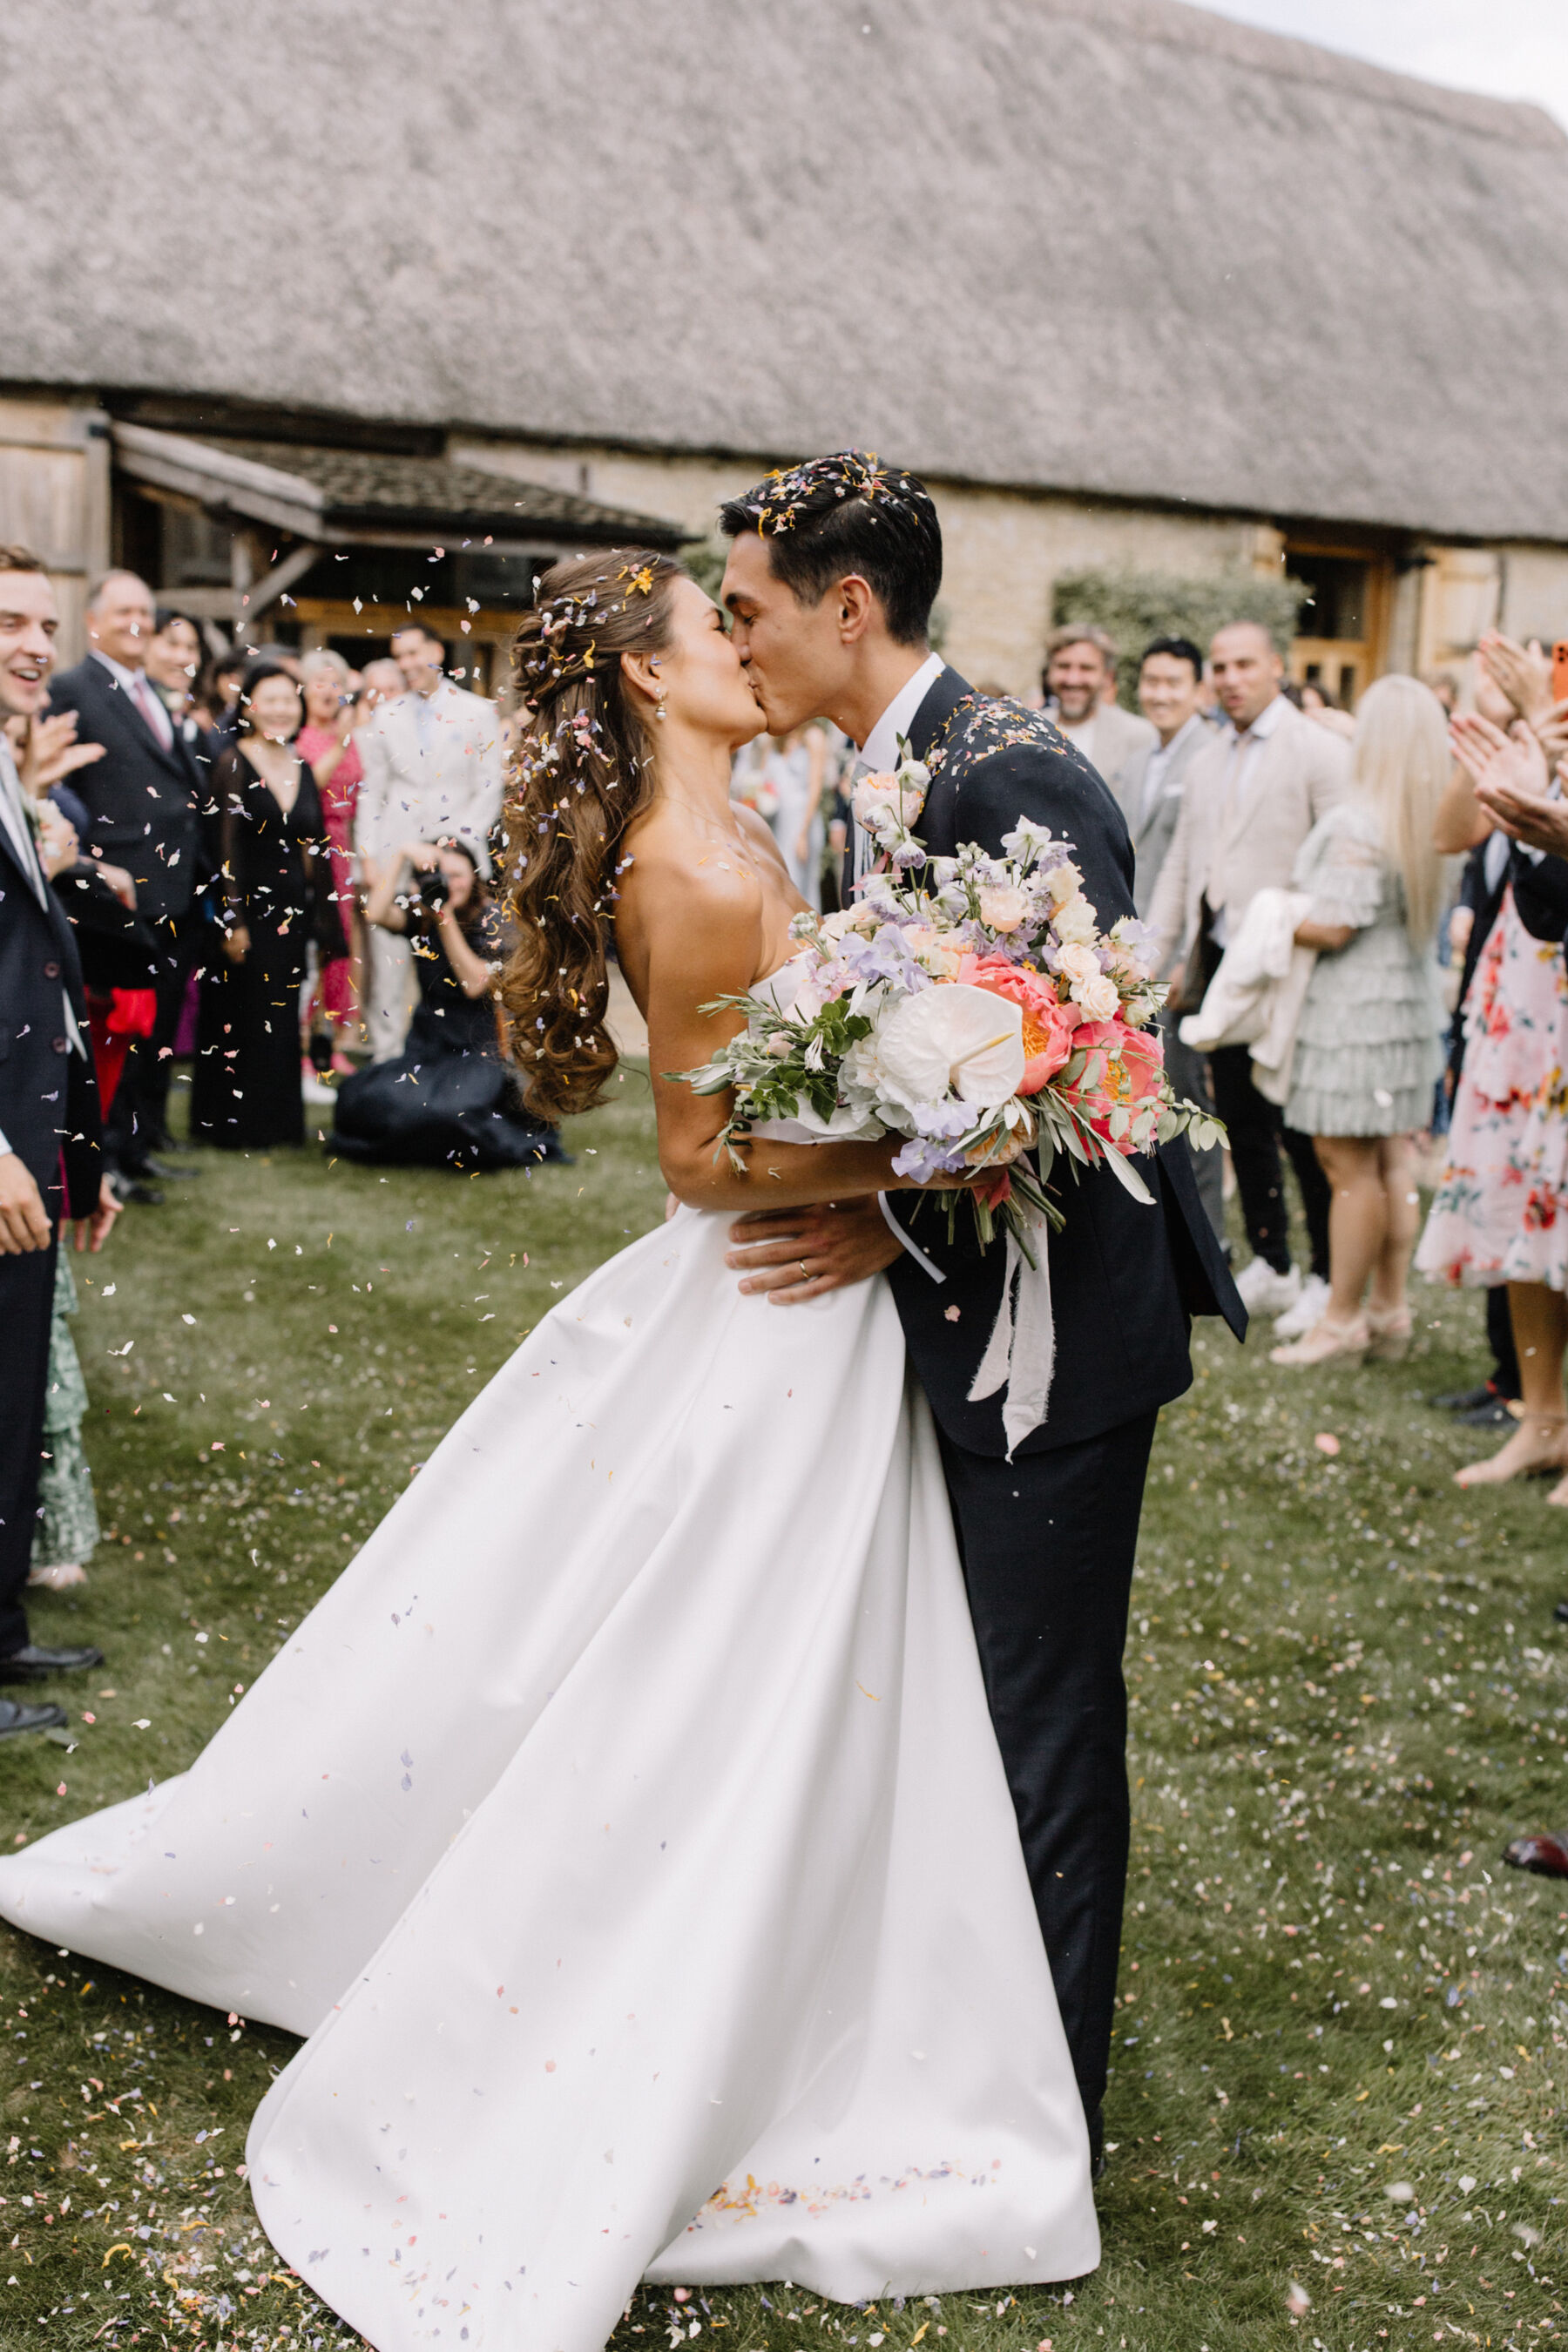 Bride and groom getting married at Tythe barn wedding venue, The Cotswolds